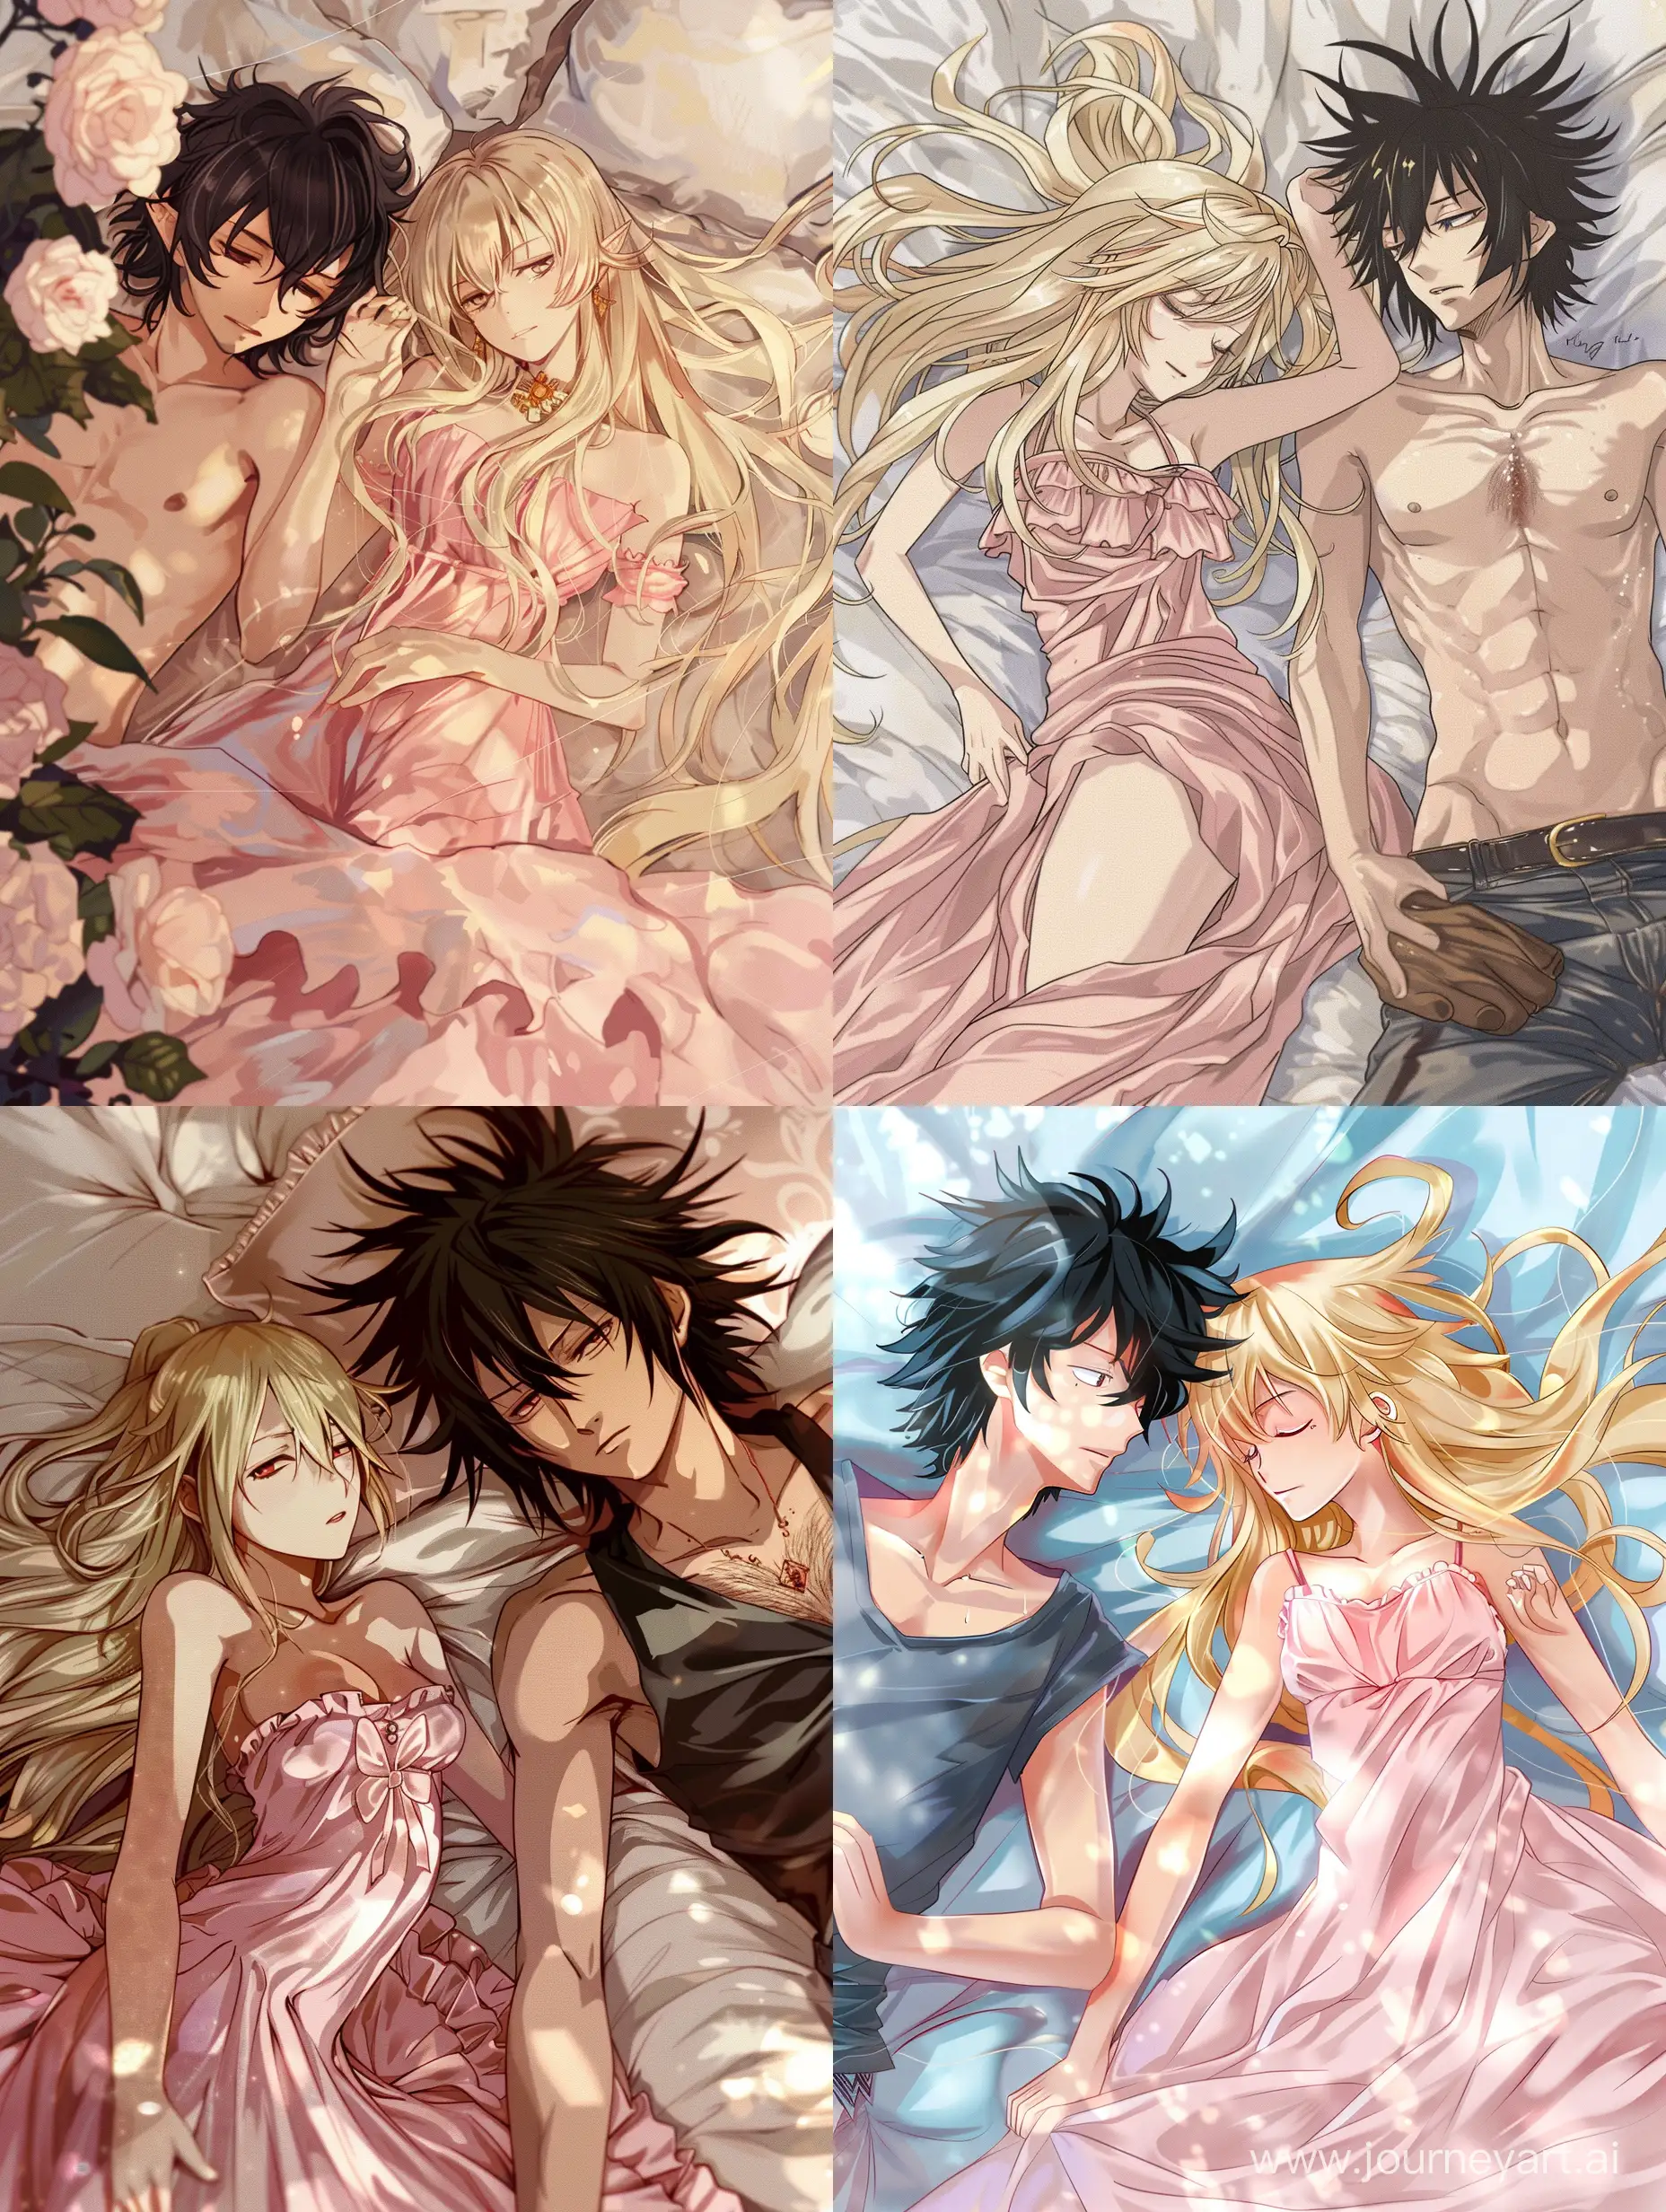 fantasy, romance a girl with blond long hair and a pink dress lies on the bed and next to a man with black hair